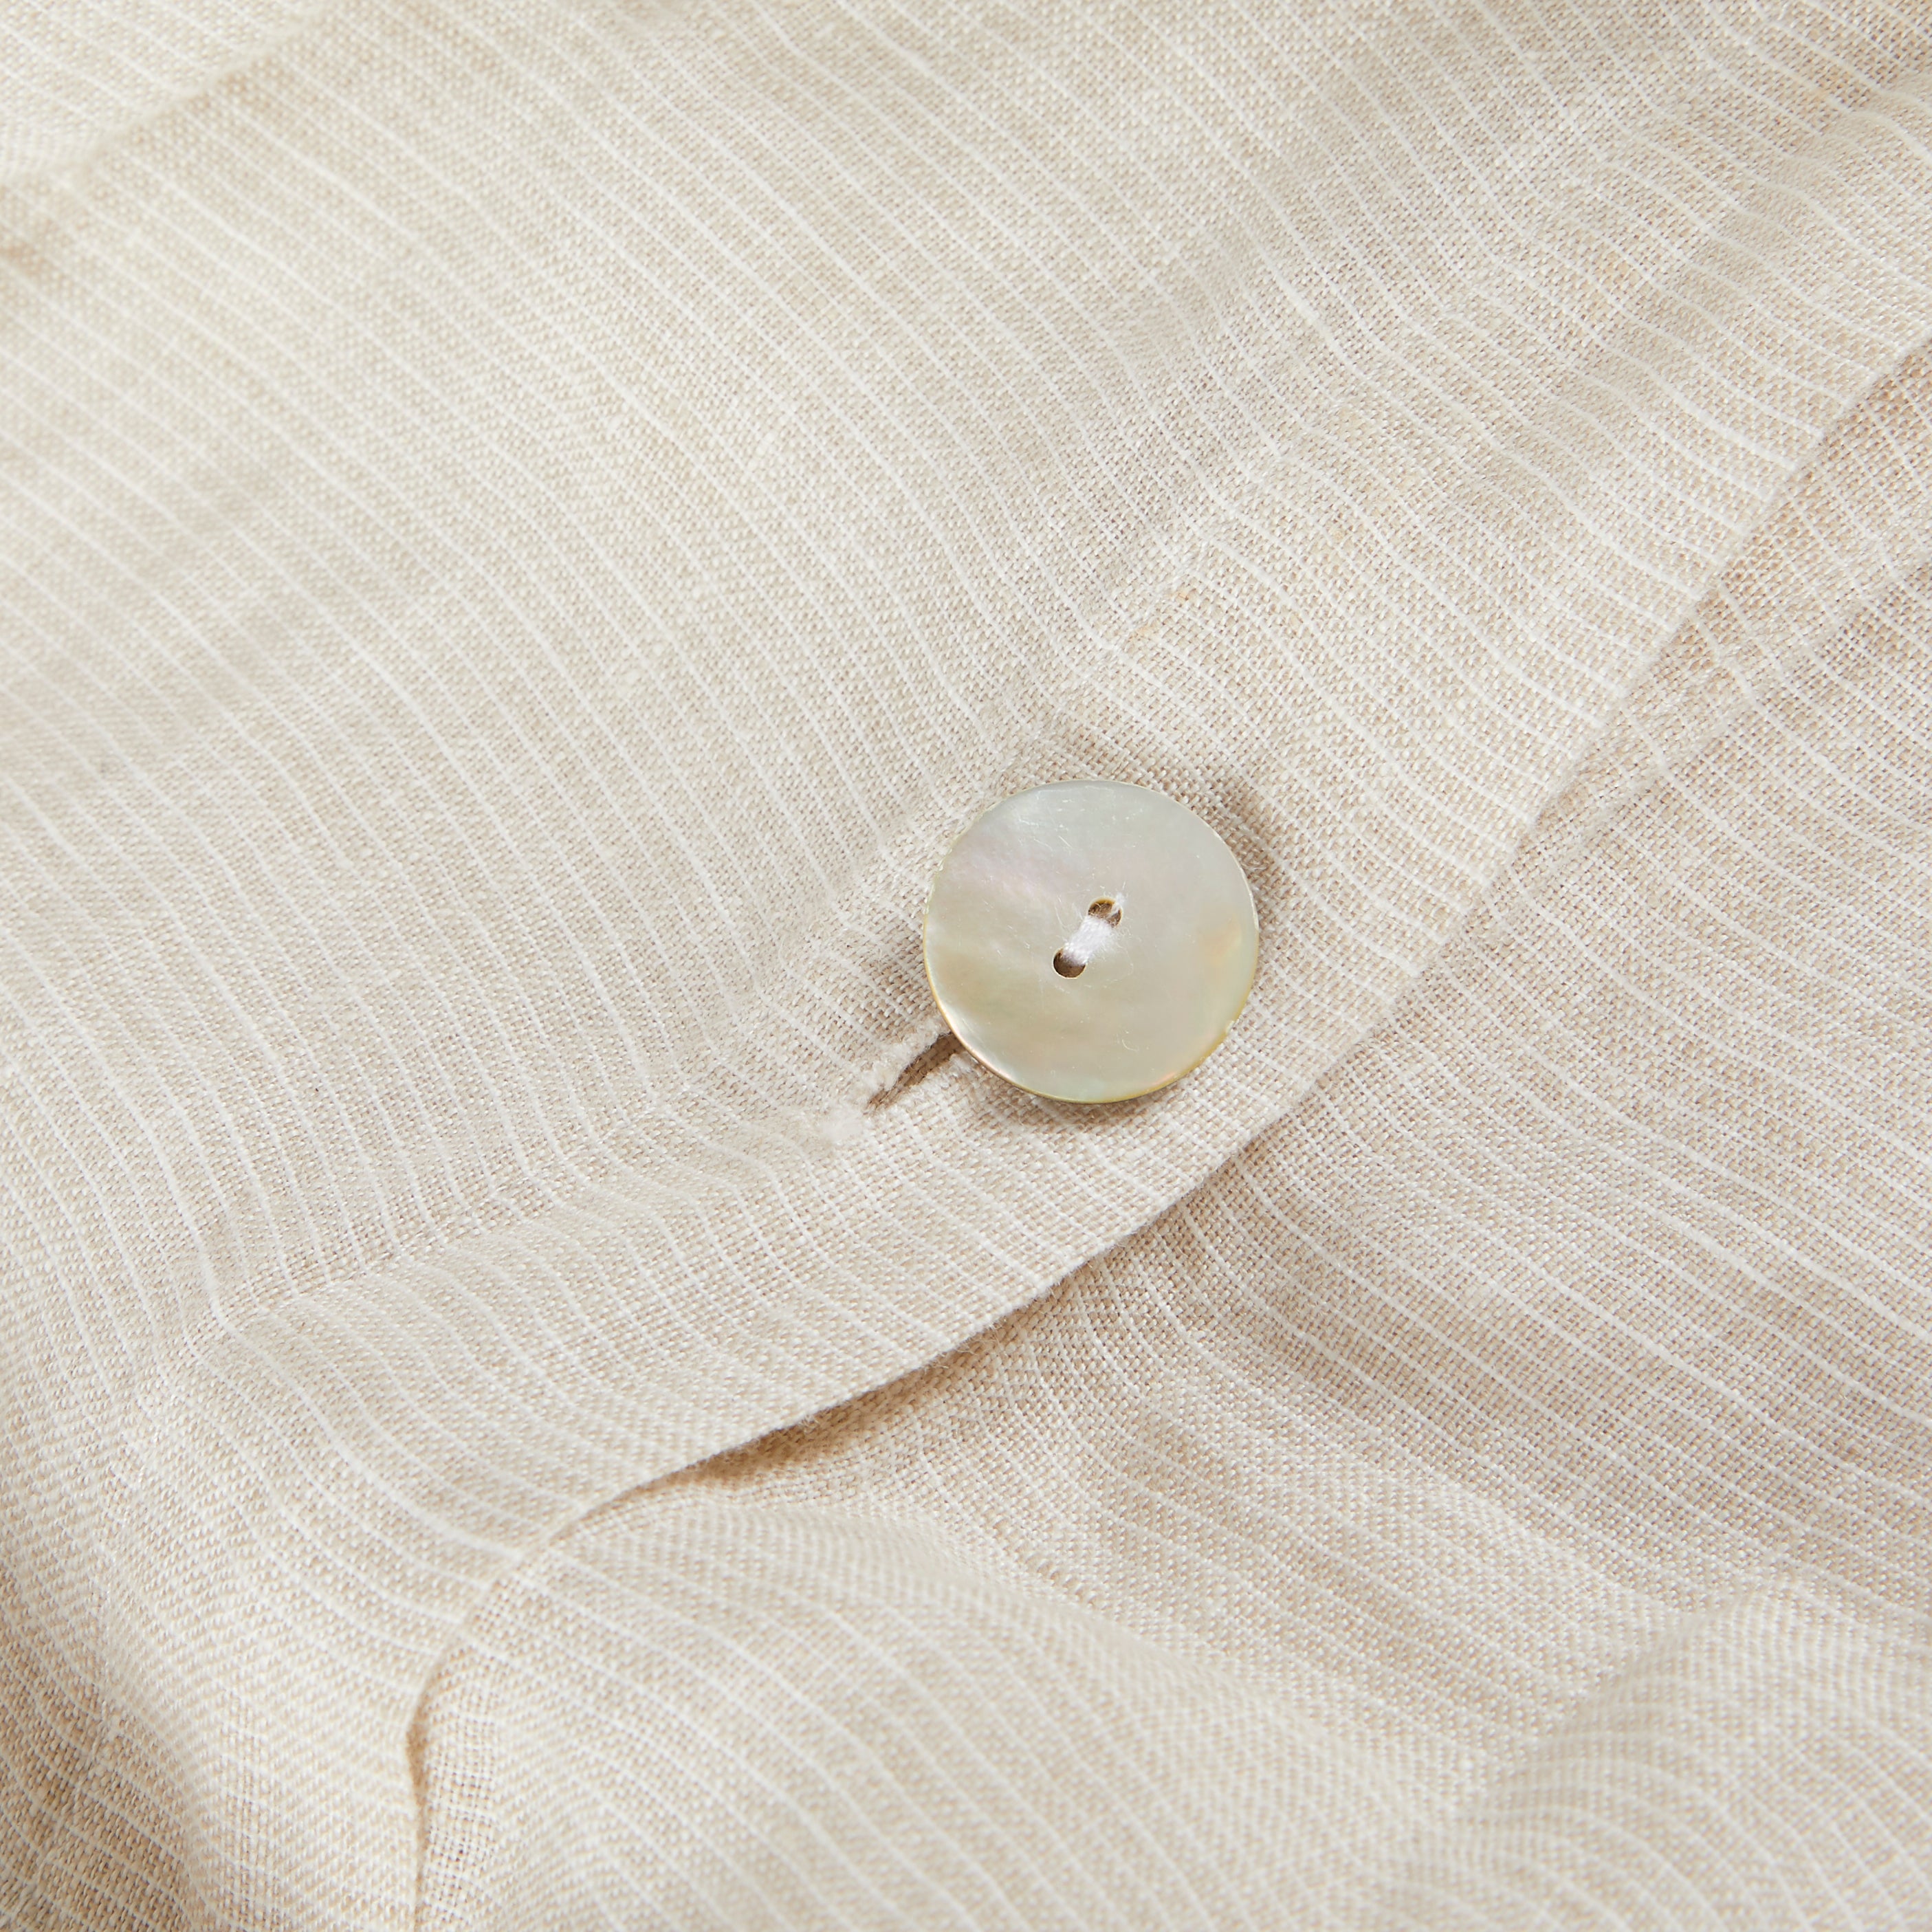 Detail layer linen bedding with mother of pearl button